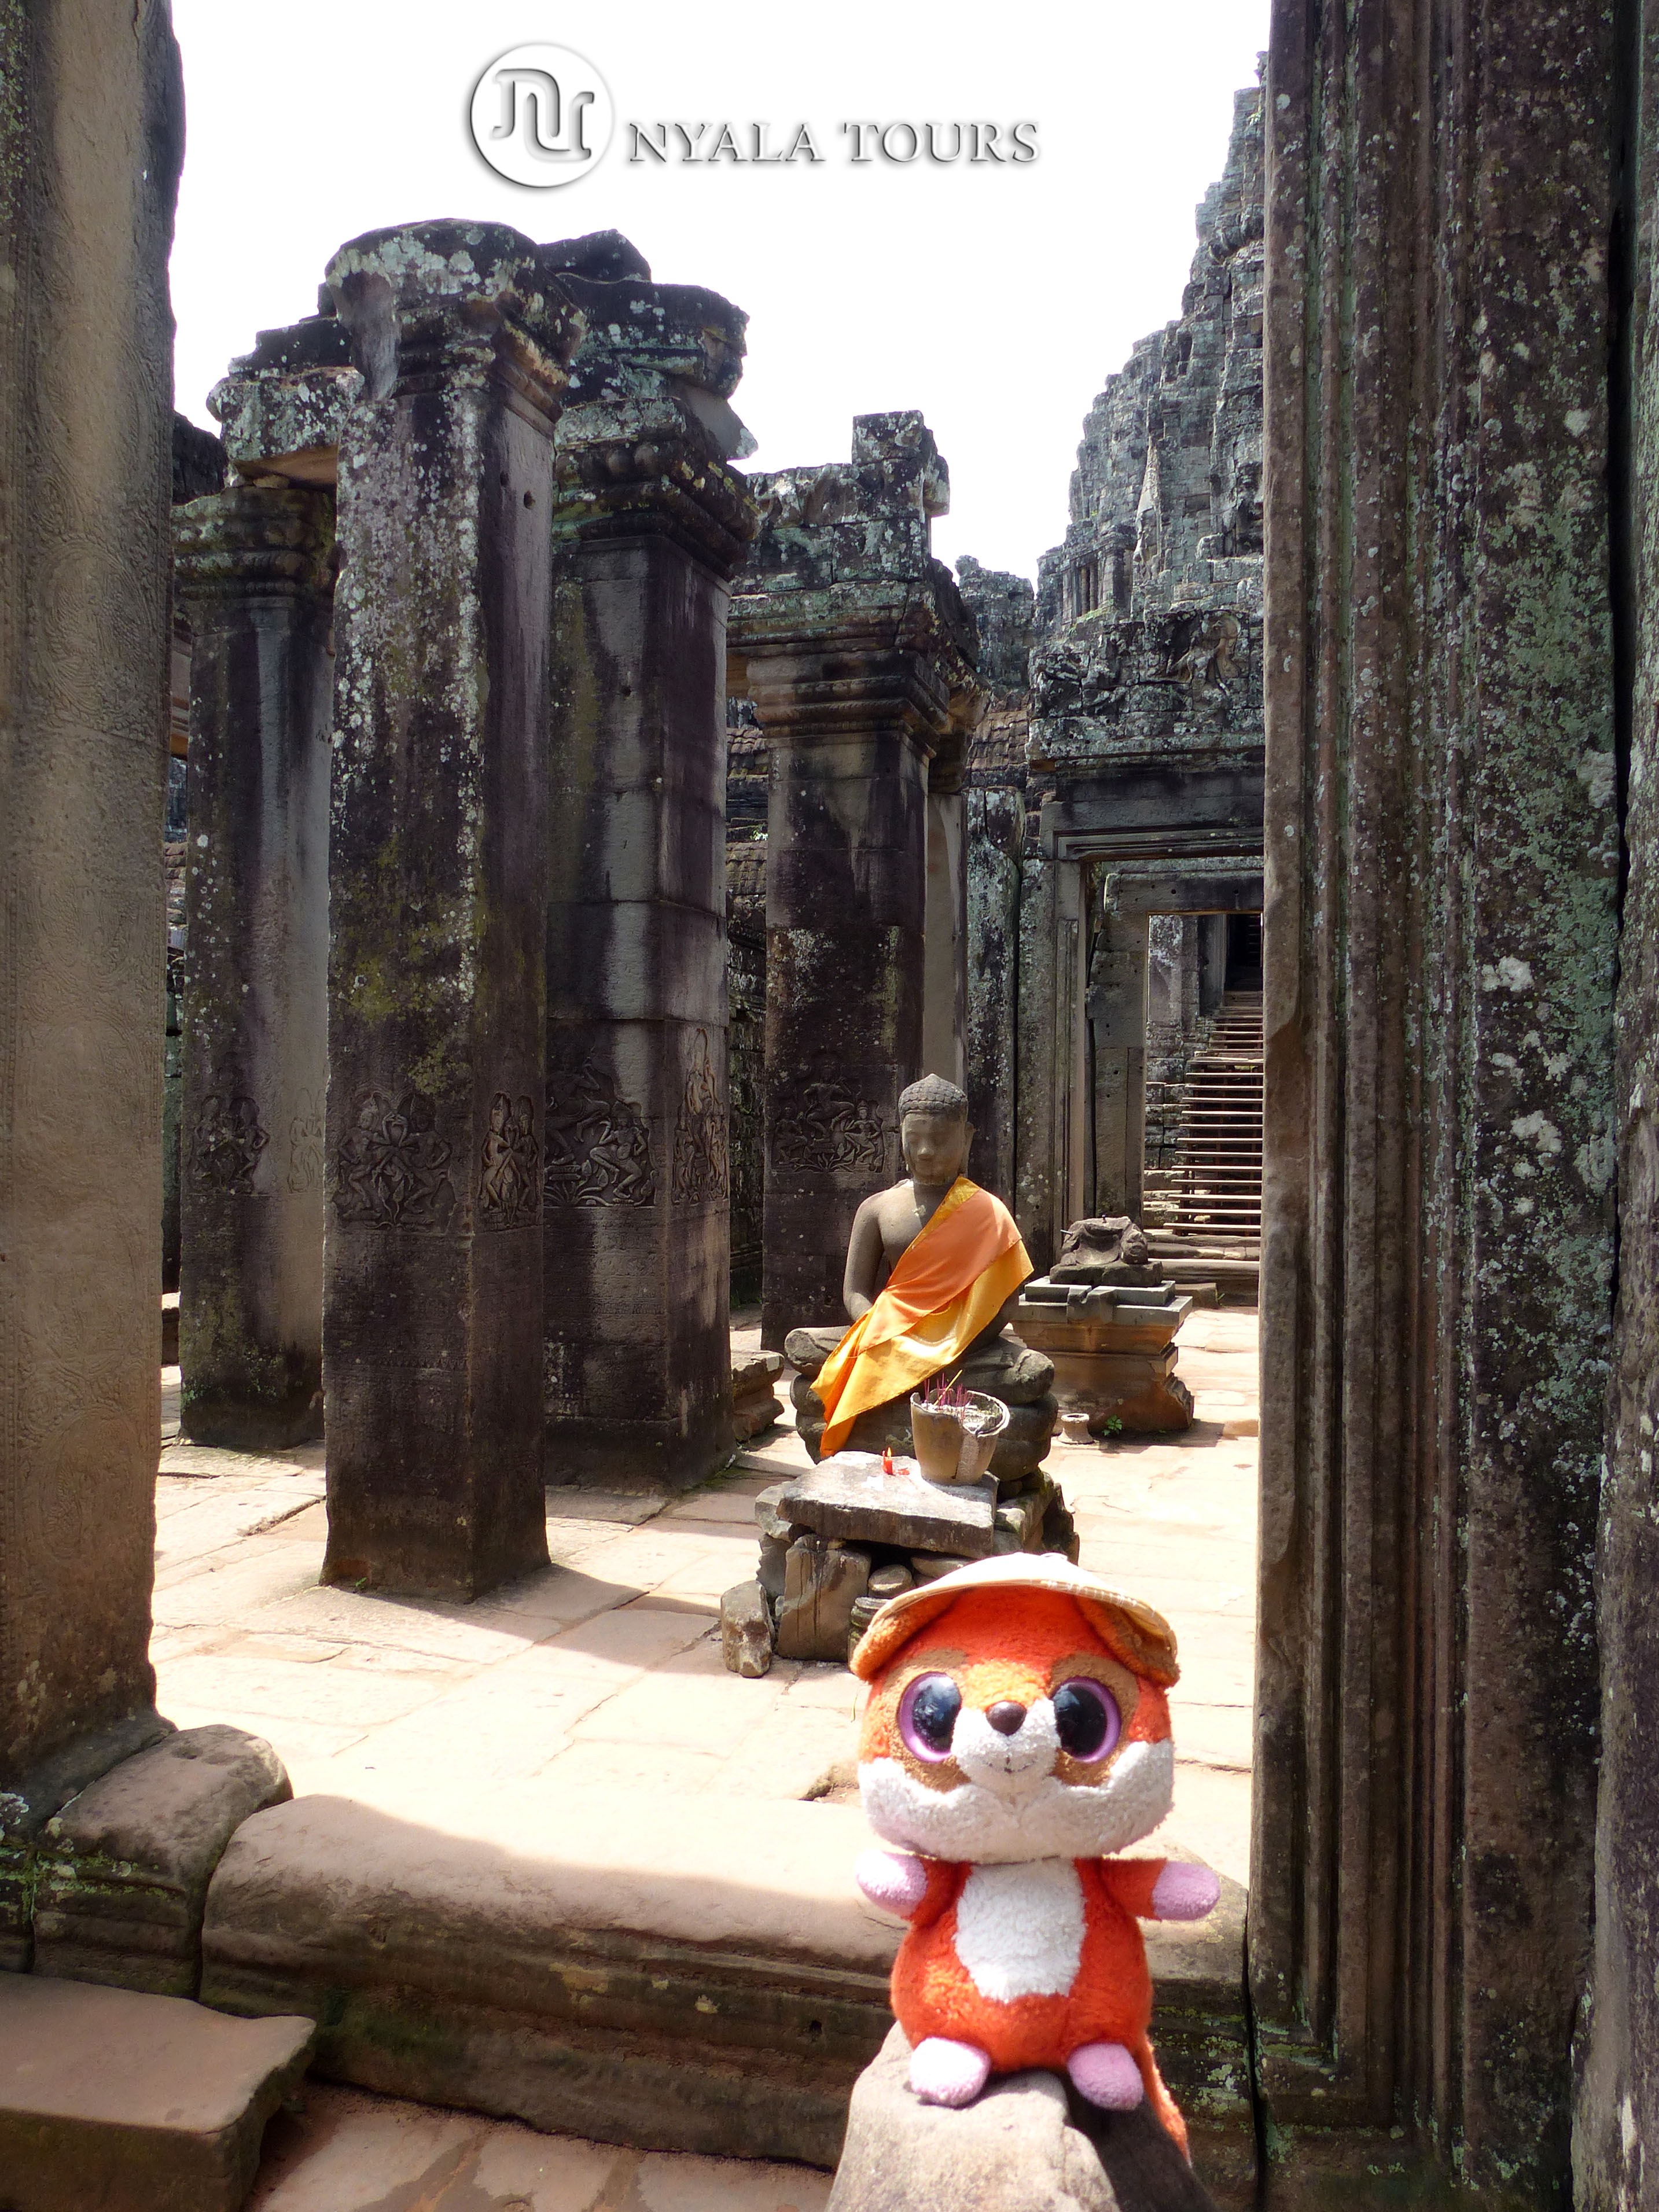 RUBY AND TEMPLE ANGKOR